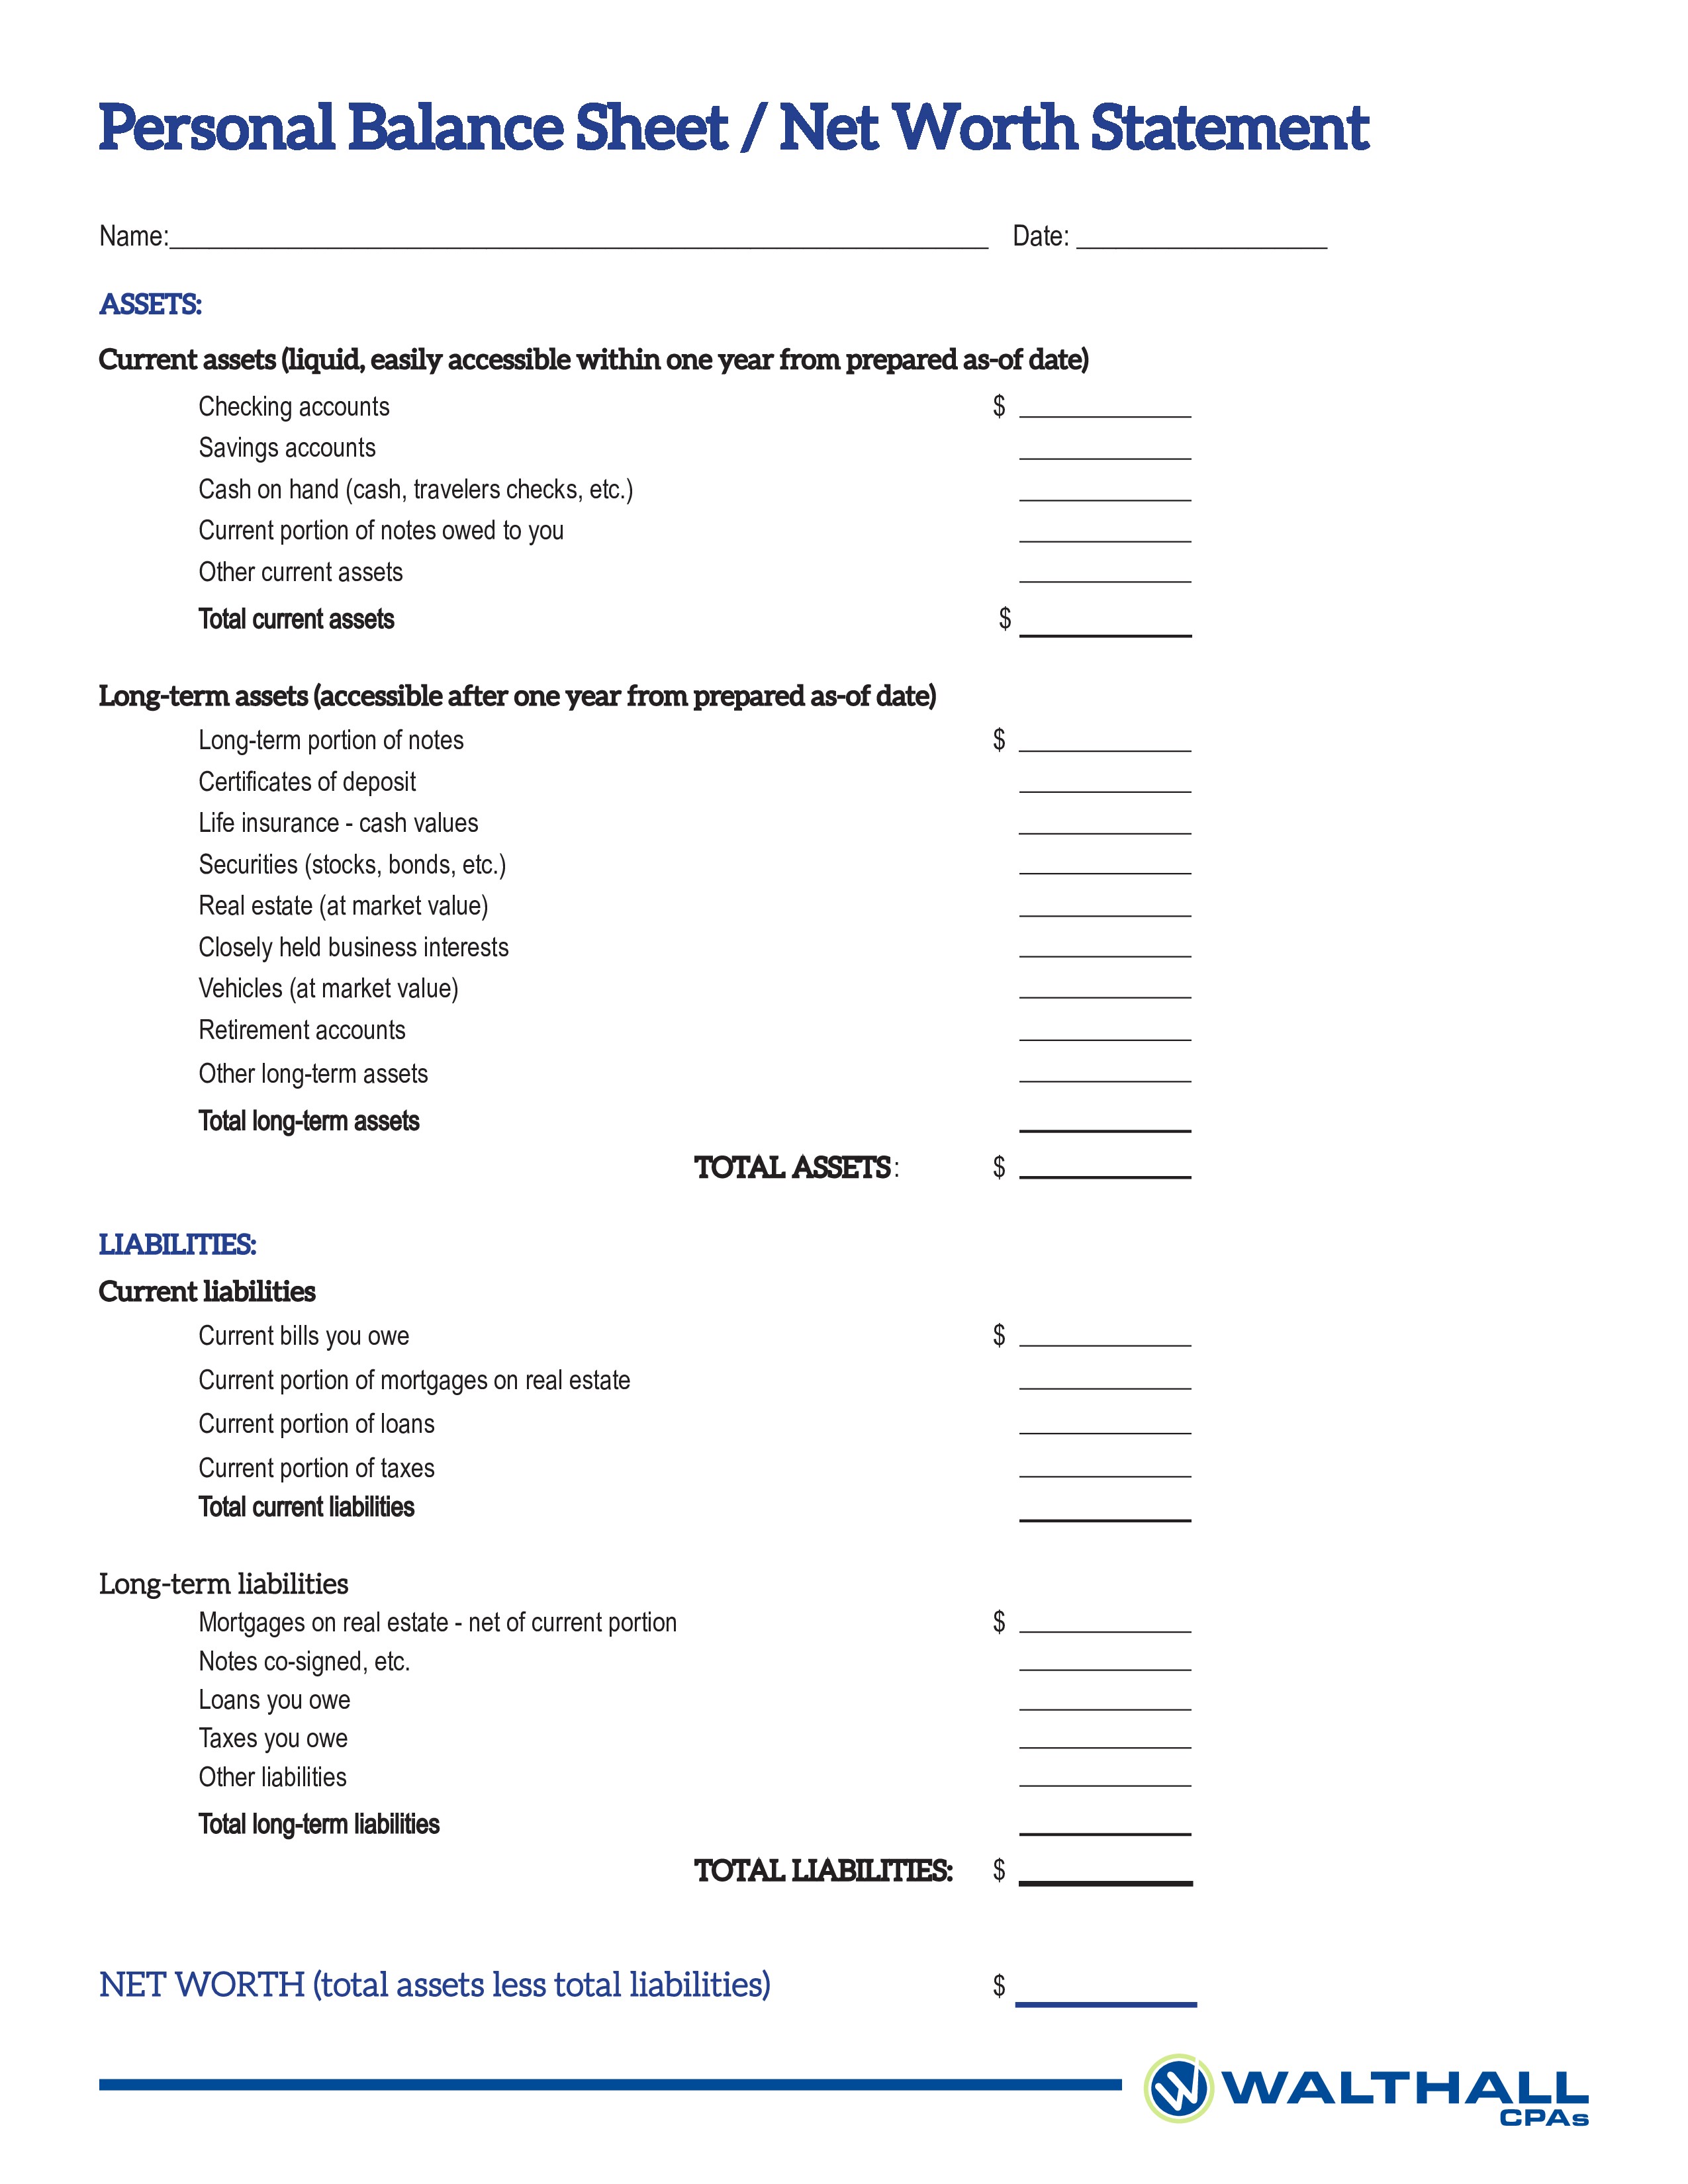 Free Printable Personal Balance Sheet Templates At Document Blank